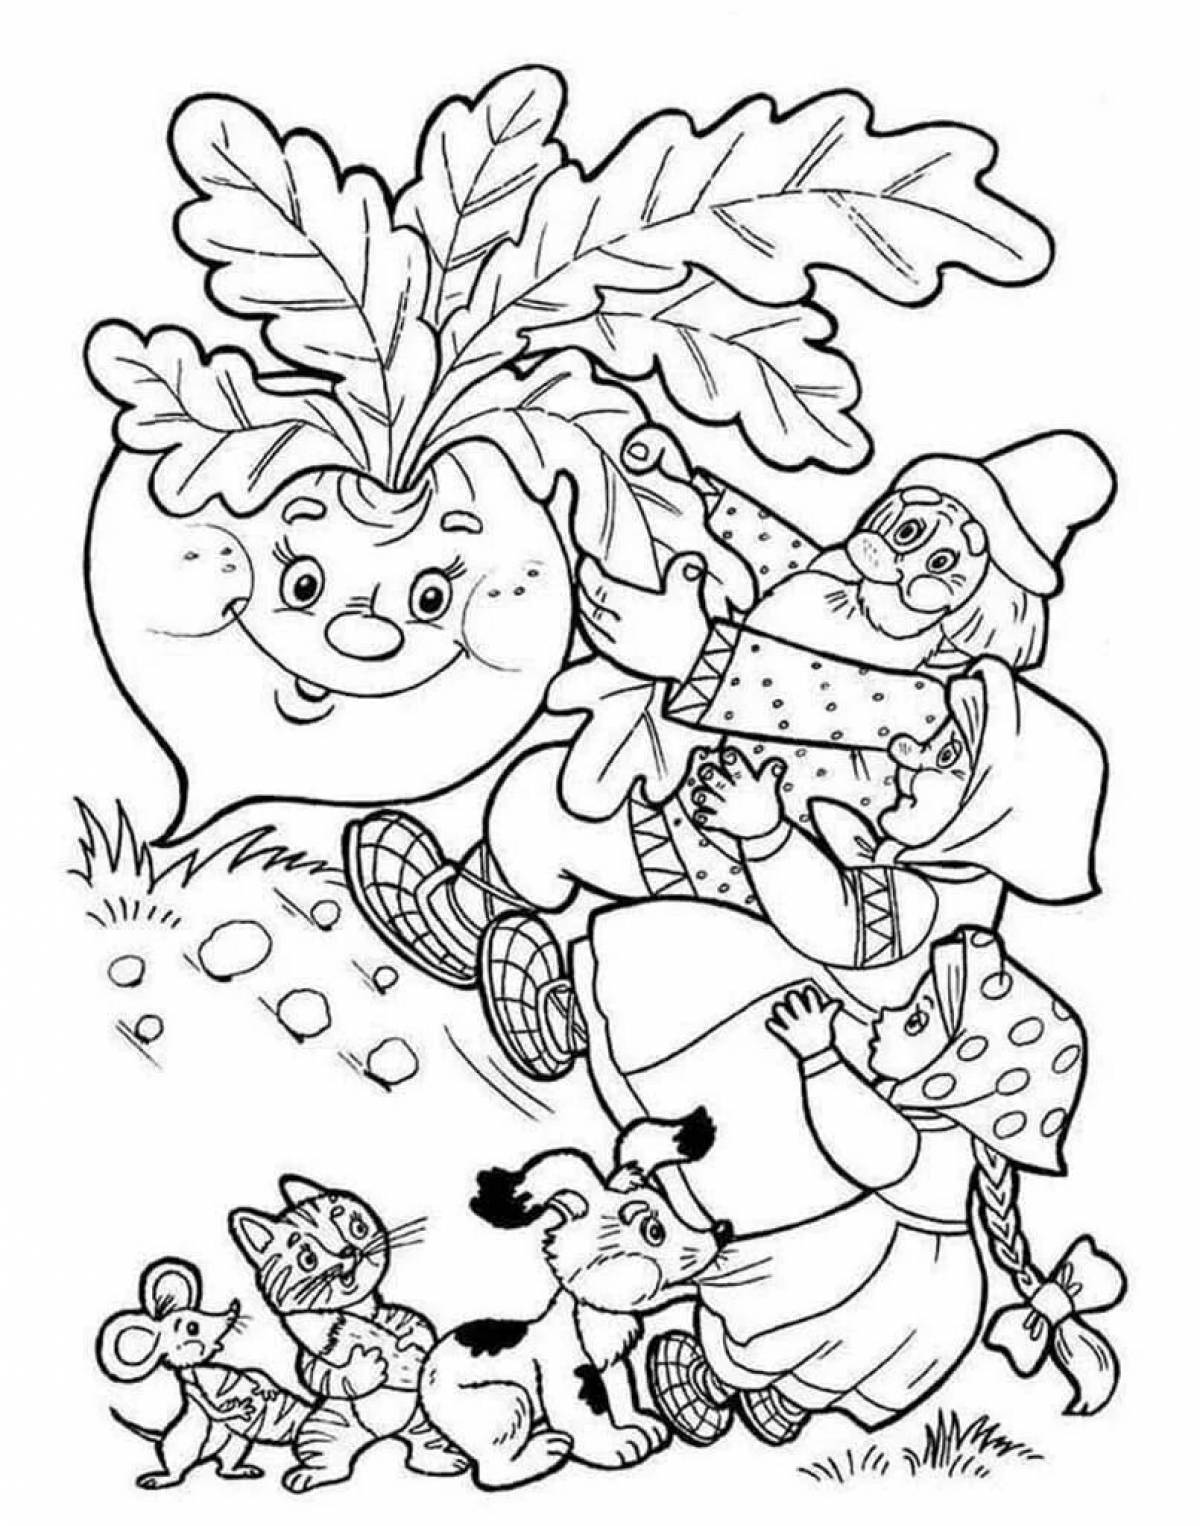 Fabulous turnip coloring pages for kids